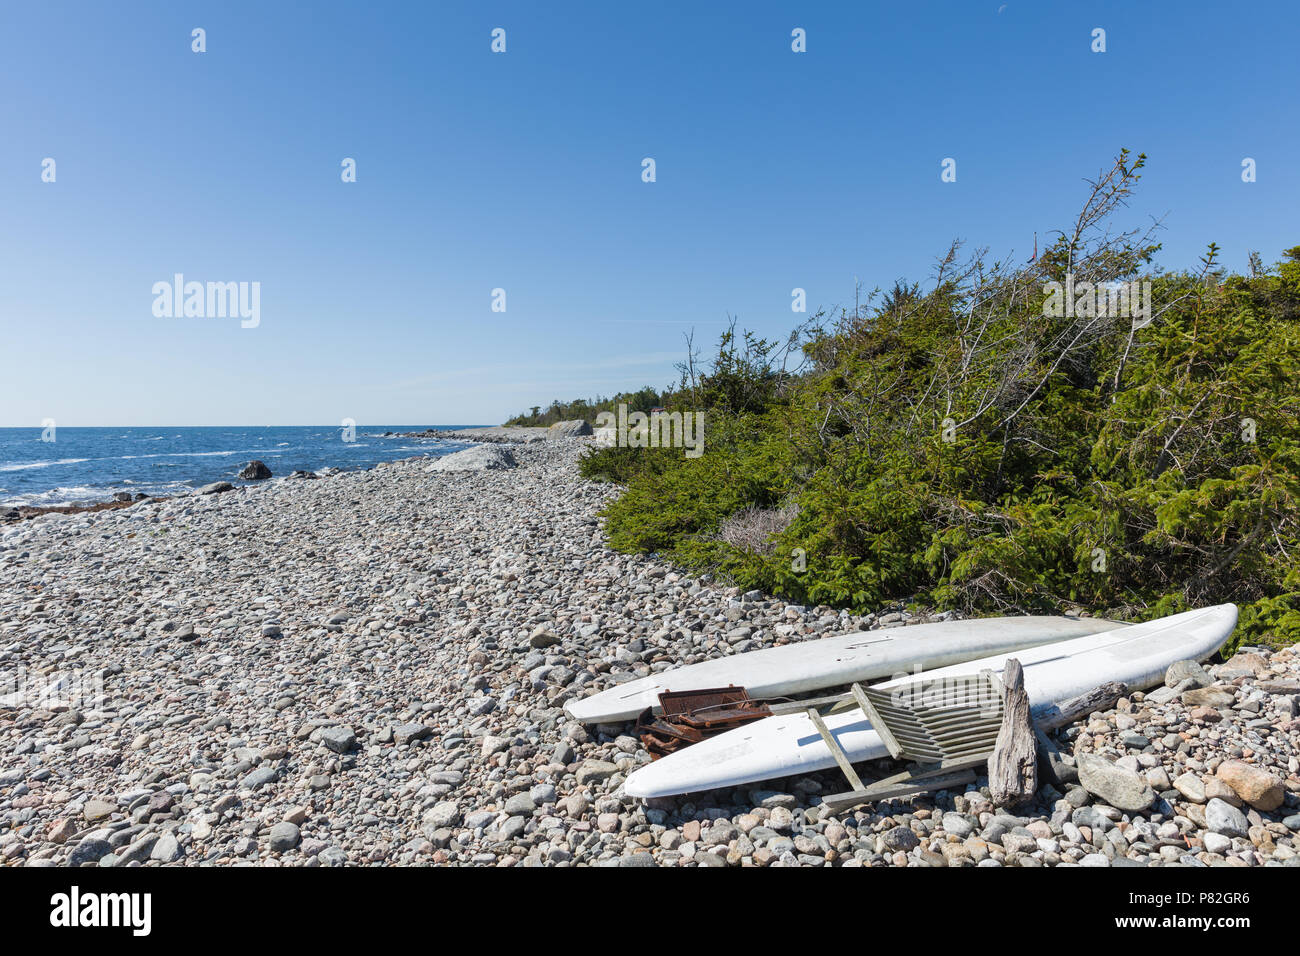 Old windsurfing boards found on a rocky beach. Stock Photo